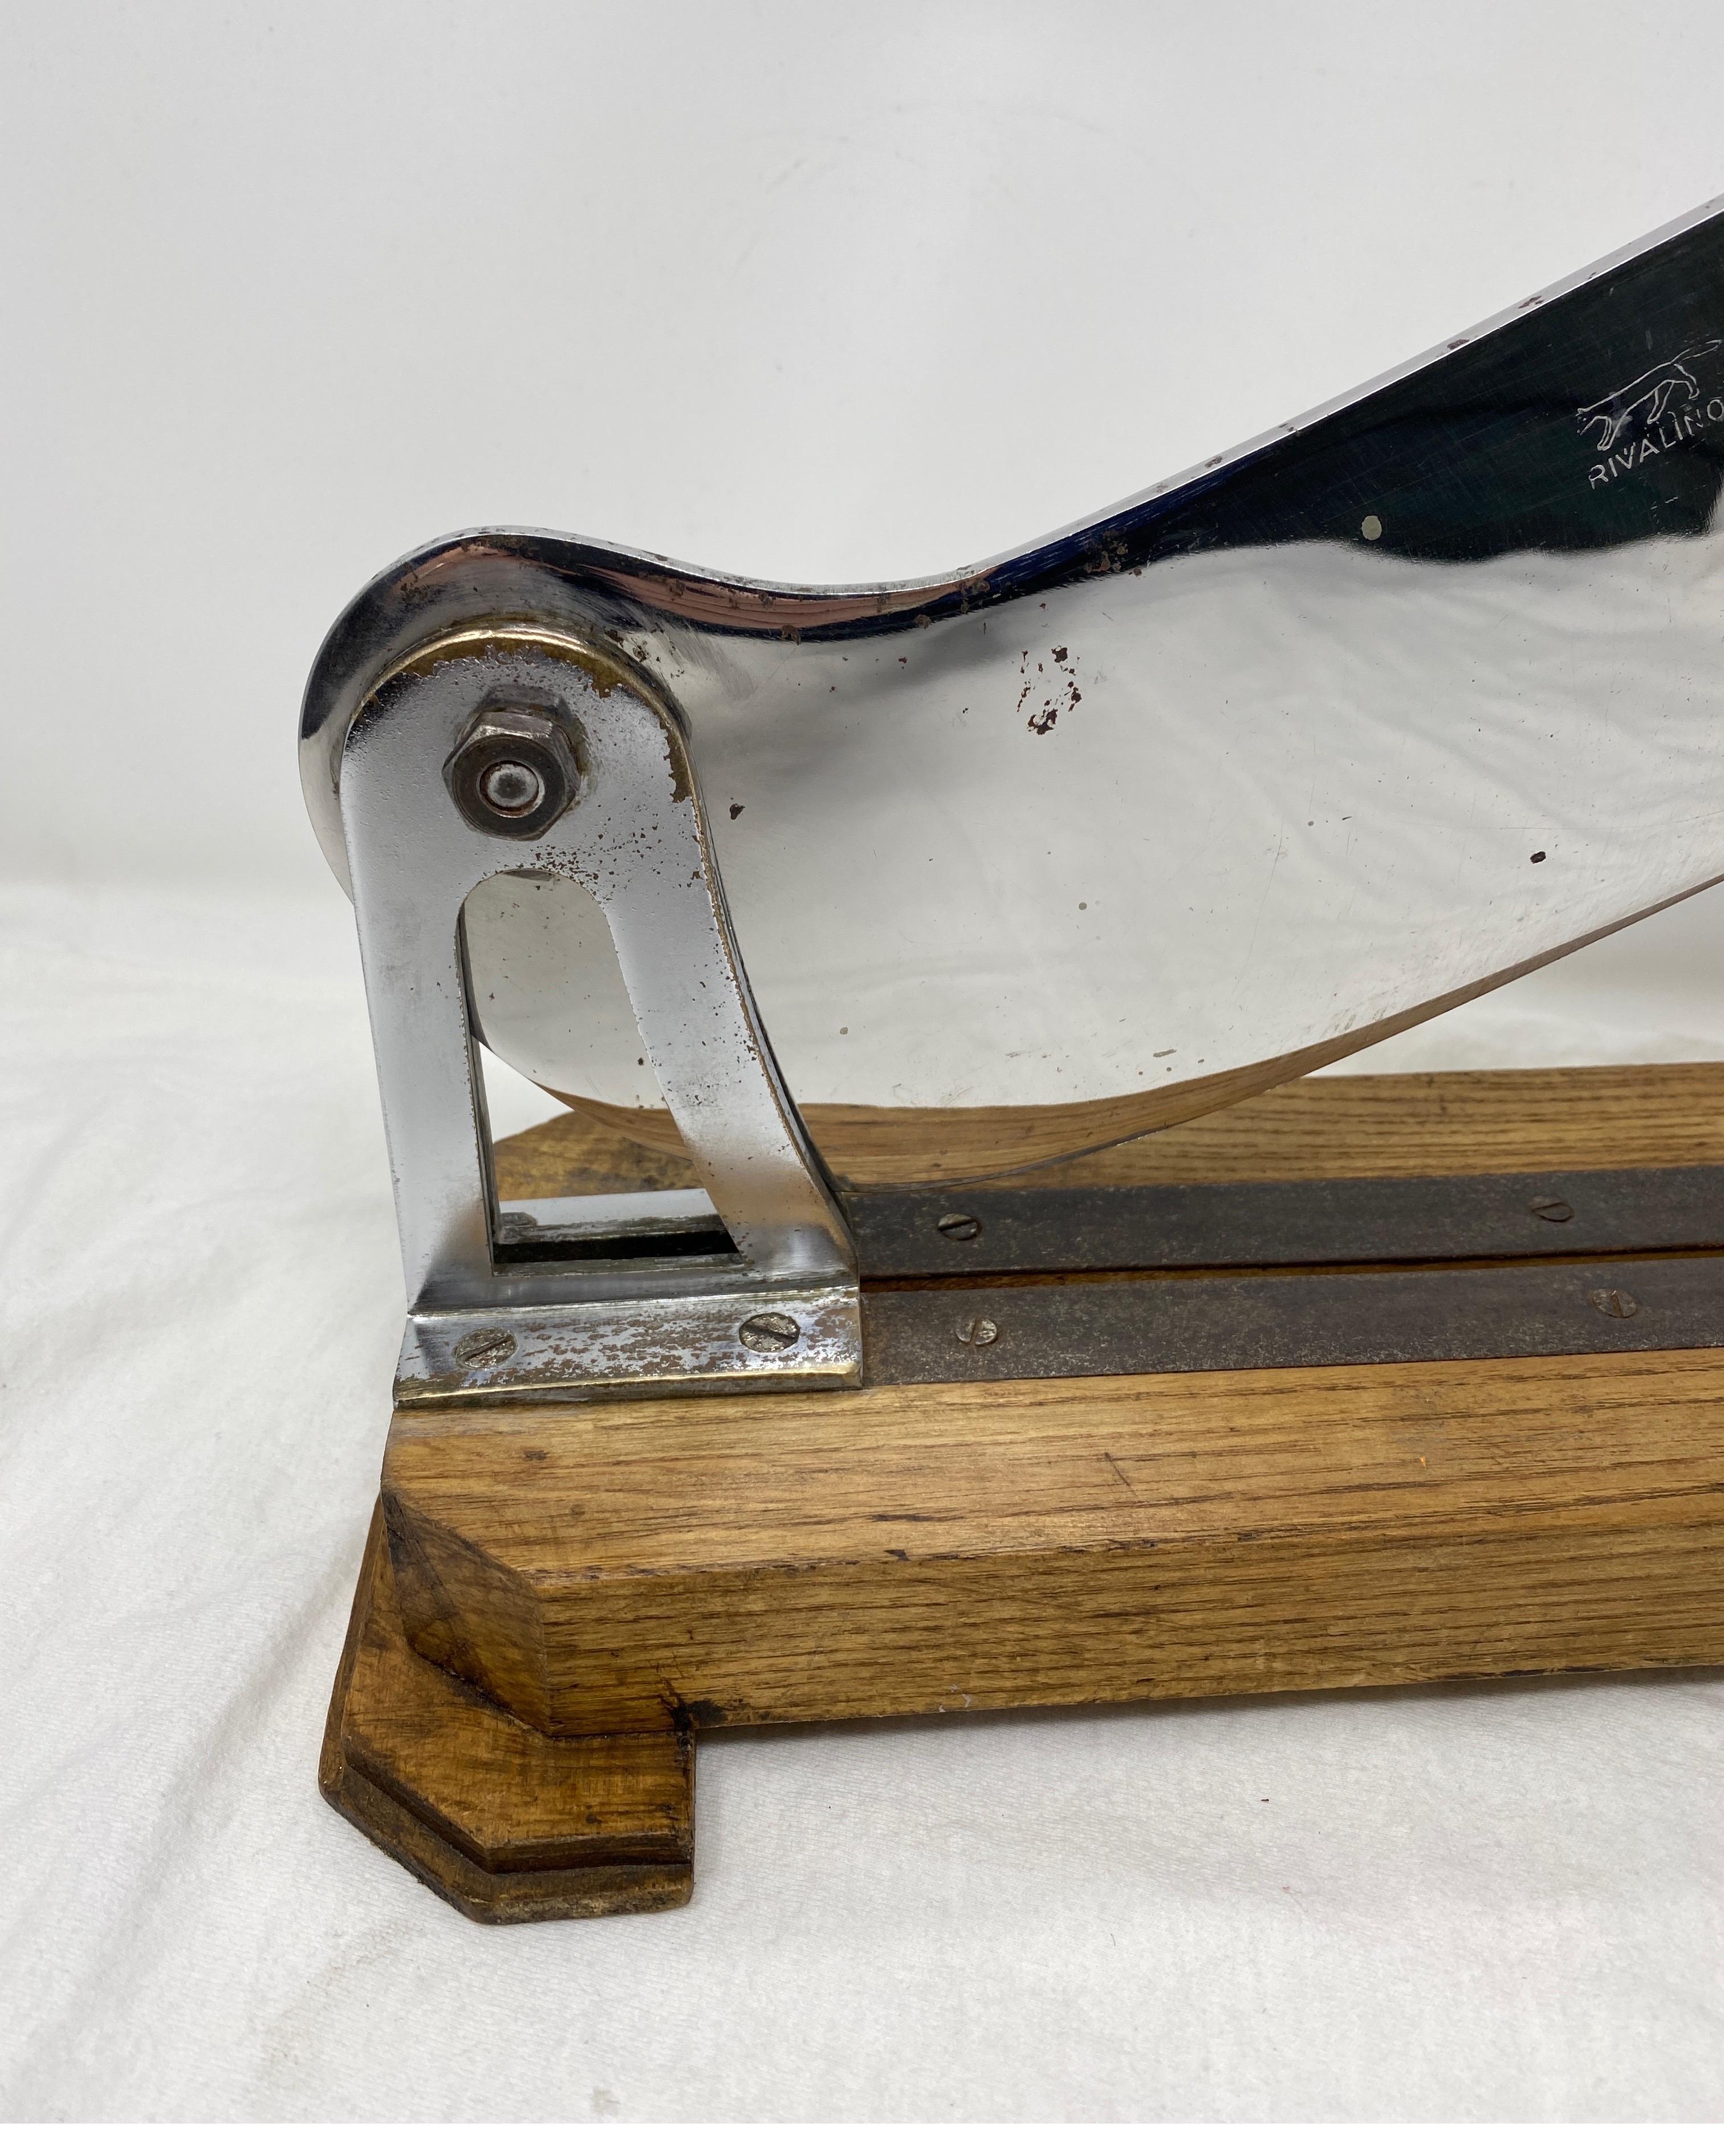 A traditional French restaurant baguette cutter. Typically found at the server's station in practically every restaurant and bistro in France. They were used to cut baguettes into the pieces served to tables and were designed so that they could cut